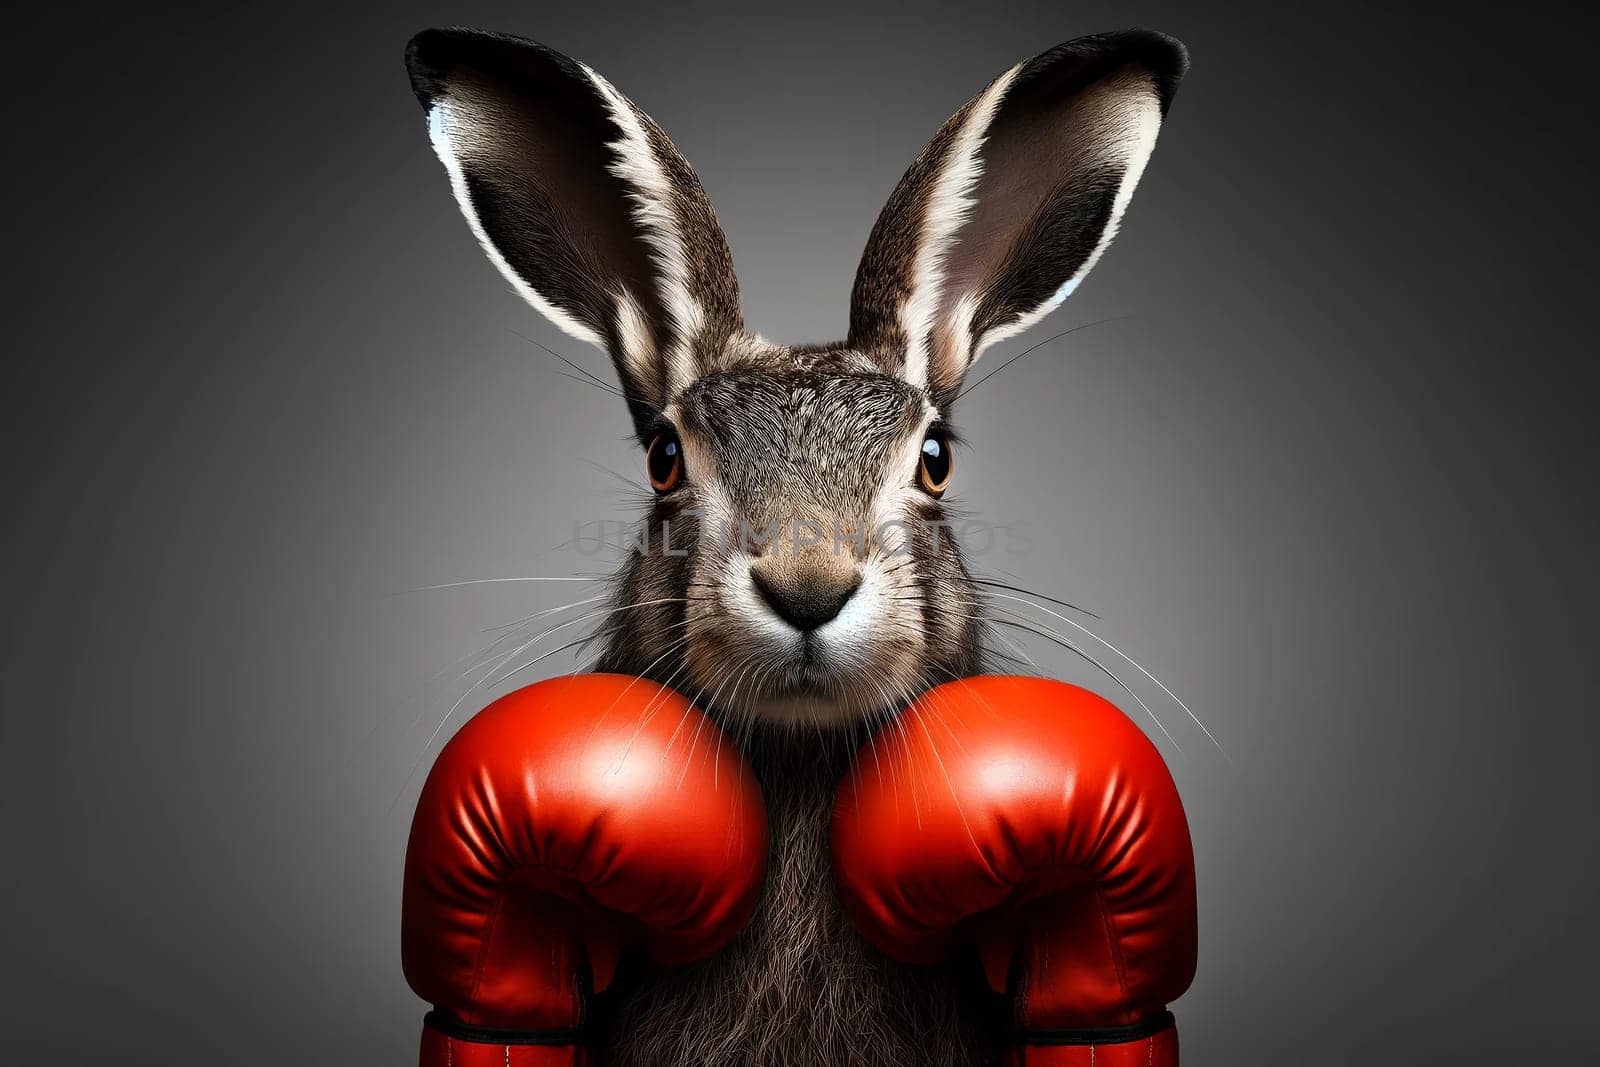 portrait of a hare in boxing gloves on a gray background close-up